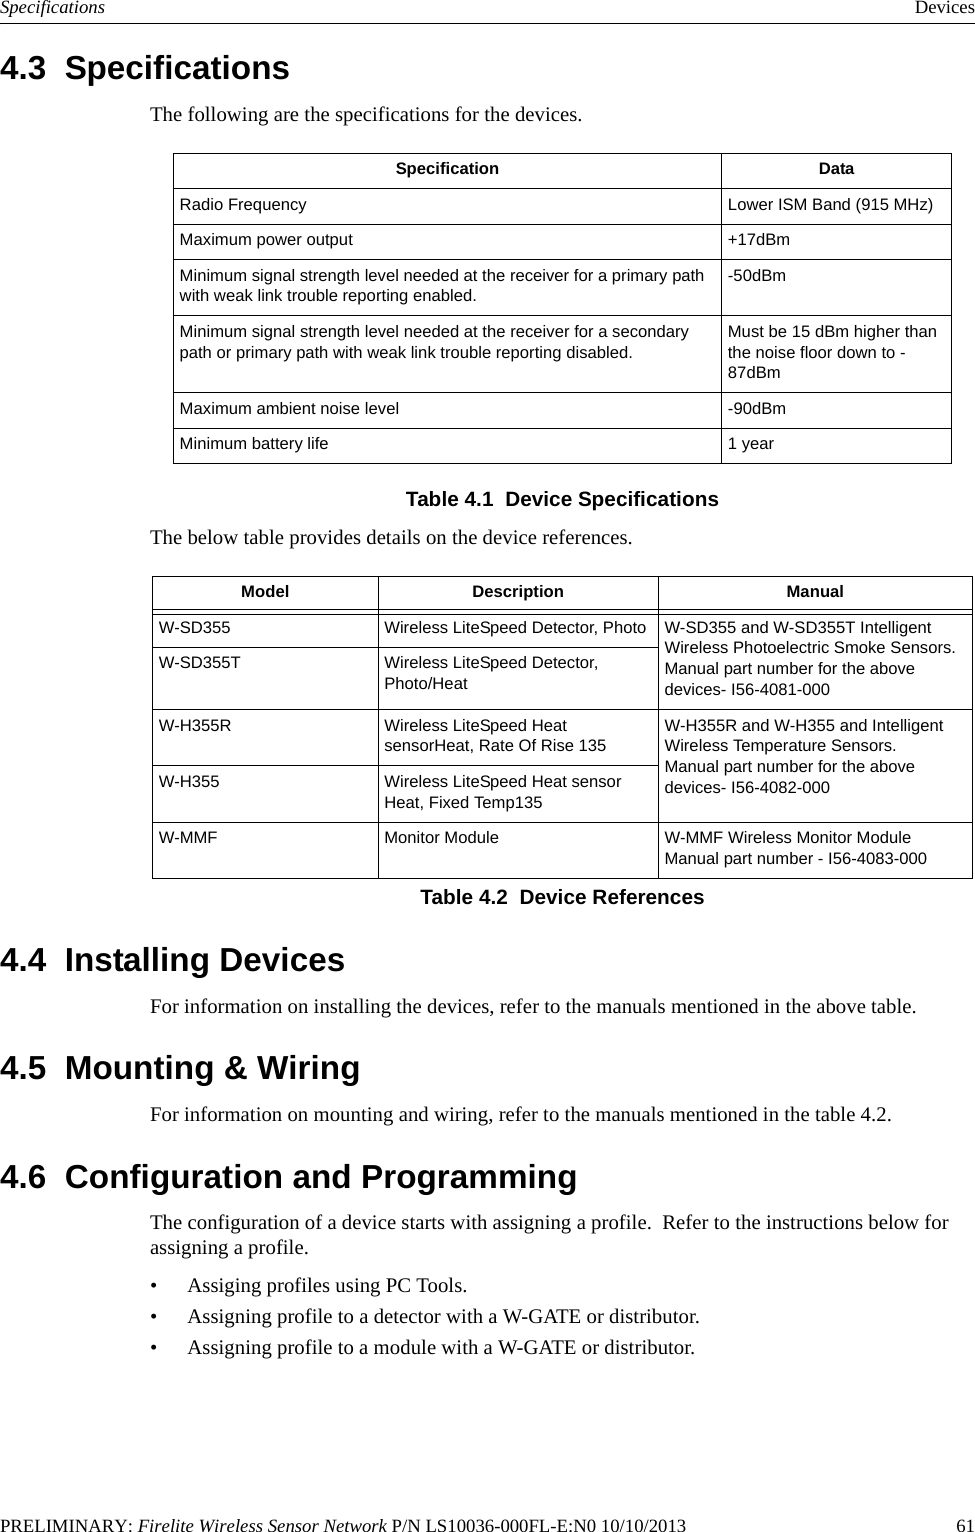 PRELIMINARY: Firelite Wireless Sensor Network P/N LS10036-000FL-E:N0 10/10/2013   61Specifications Devices4.3  SpecificationsThe following are the specifications for the devices.Table 4.1  Device SpecificationsThe below table provides details on the device references.4.4  Installing DevicesFor information on installing the devices, refer to the manuals mentioned in the above table.4.5  Mounting &amp; WiringFor information on mounting and wiring, refer to the manuals mentioned in the table 4.2.4.6  Configuration and ProgrammingThe configuration of a device starts with assigning a profile.  Refer to the instructions below for assigning a profile. • Assiging profiles using PC Tools.• Assigning profile to a detector with a W-GATE or distributor.• Assigning profile to a module with a W-GATE or distributor.Specification DataRadio Frequency Lower ISM Band (915 MHz)Maximum power output +17dBmMinimum signal strength level needed at the receiver for a primary path with weak link trouble reporting enabled.-50dBmMinimum signal strength level needed at the receiver for a secondary path or primary path with weak link trouble reporting disabled.Must be 15 dBm higher than the noise floor down to -87dBmMaximum ambient noise level -90dBmMinimum battery life 1 yearModel Description ManualW-SD355 Wireless LiteSpeed Detector, Photo W-SD355 and W-SD355T Intelligent Wireless Photoelectric Smoke Sensors.Manual part number for the above devices- I56-4081-000W-SD355T Wireless LiteSpeed Detector, Photo/HeatW-H355R Wireless LiteSpeed Heat sensorHeat, Rate Of Rise 135 W-H355R and W-H355 and Intelligent Wireless Temperature Sensors.Manual part number for the above devices- I56-4082-000 W-H355 Wireless LiteSpeed Heat sensor Heat, Fixed Temp135W-MMF Monitor Module W-MMF Wireless Monitor ModuleManual part number - I56-4083-000Table 4.2  Device References